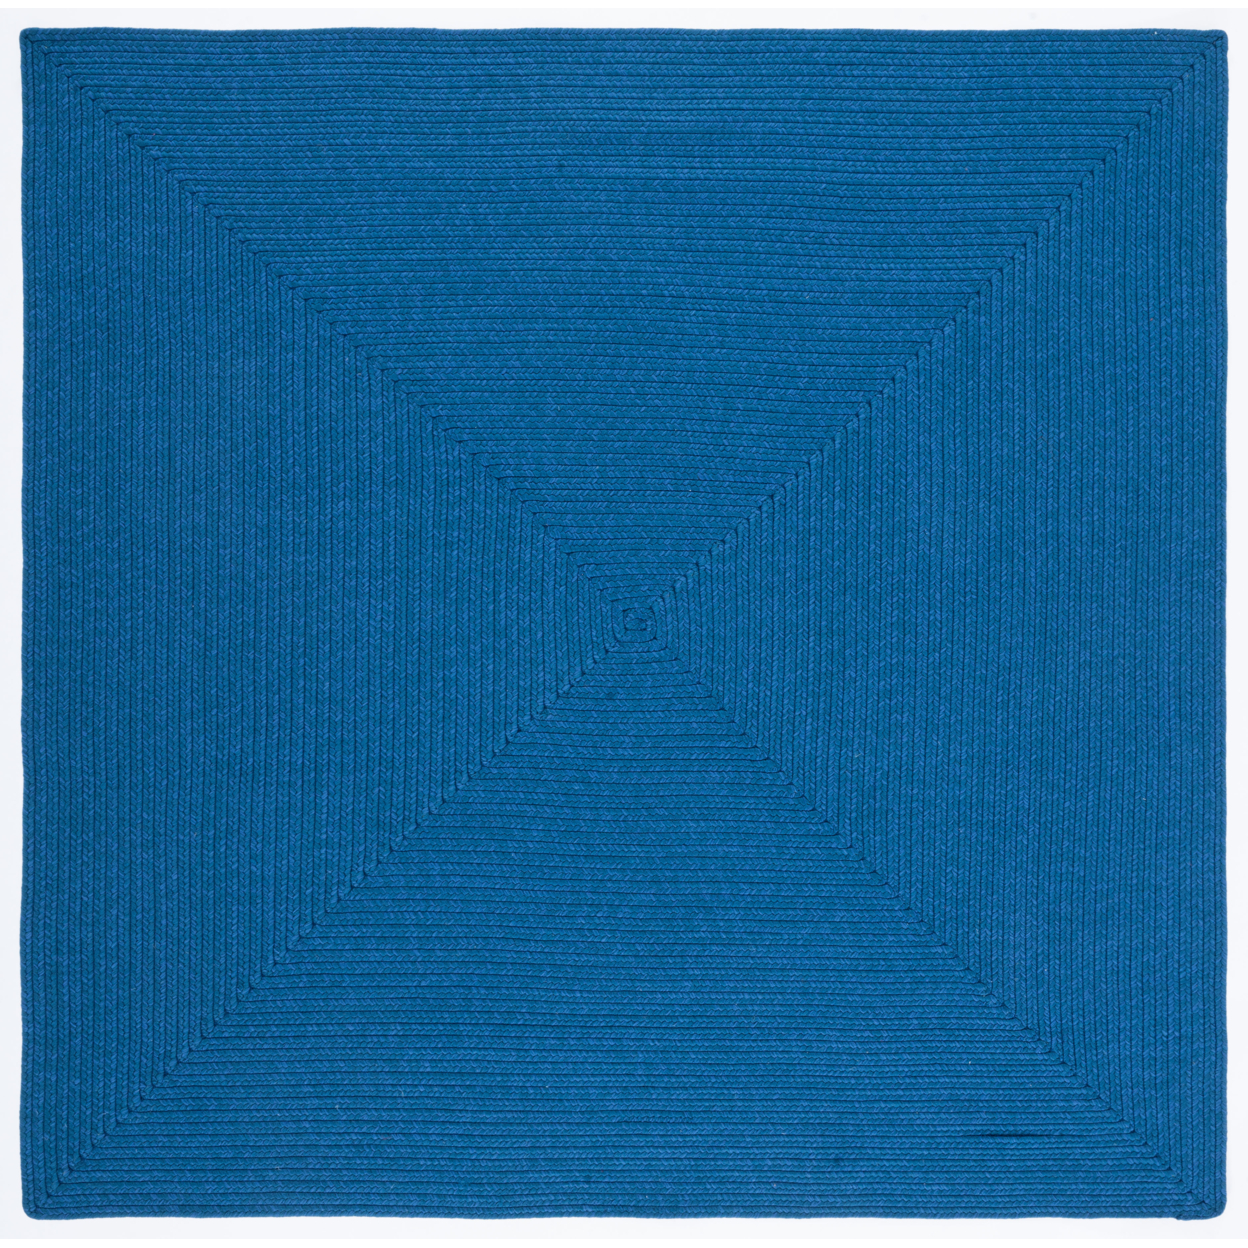 SAFAVIEH Braided Collection BRD315M Handwoven Blue Rug - 6' Square